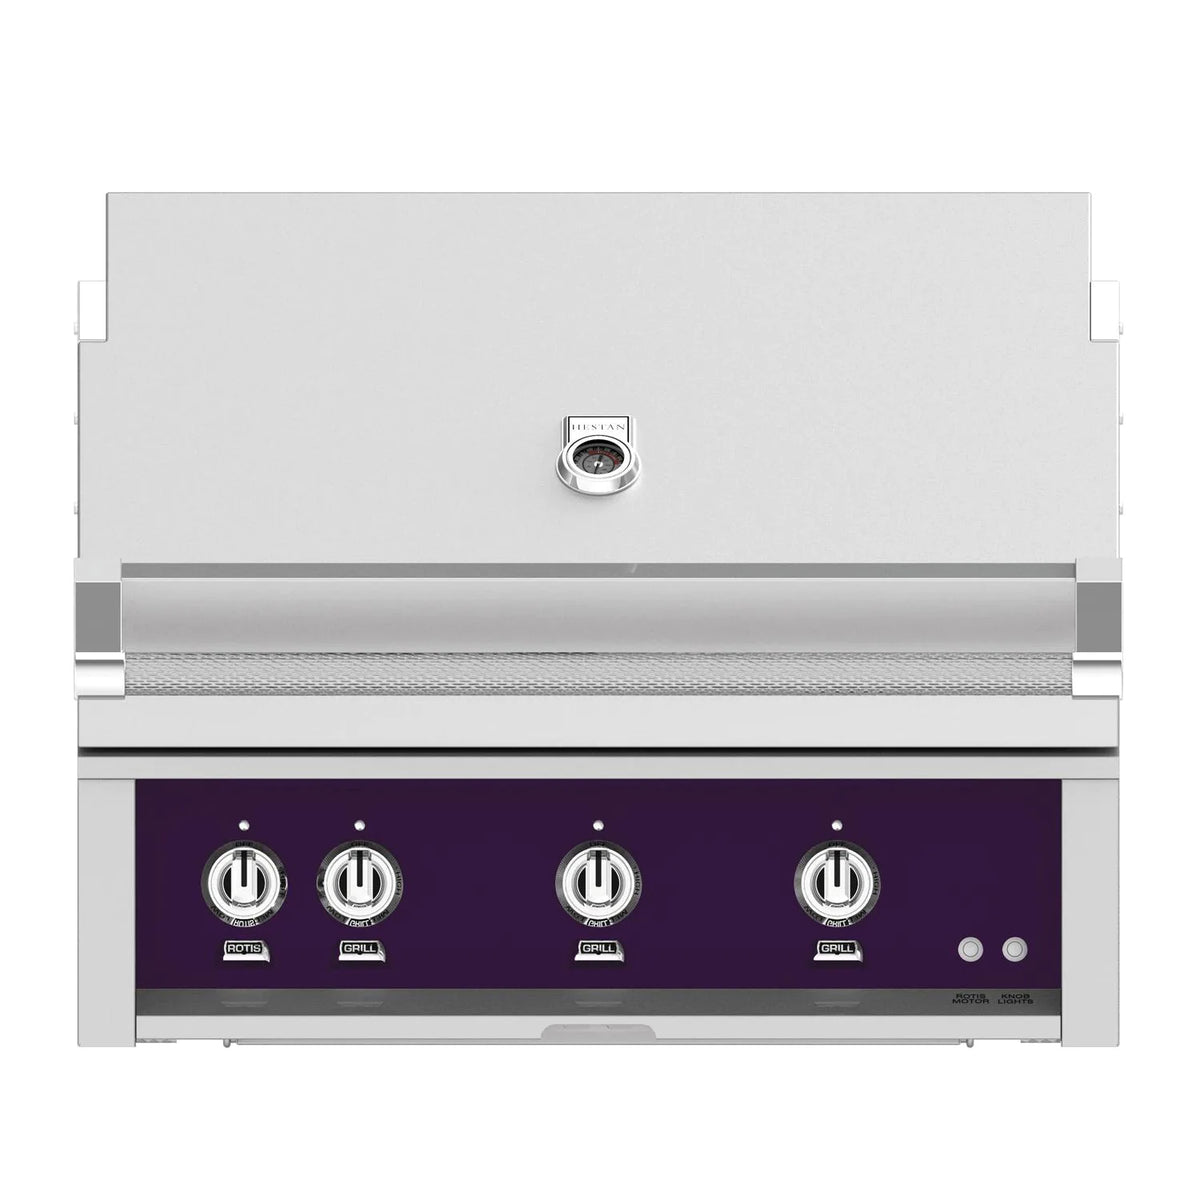 Hestan 36-Inch Built-In Gas Grill with All Infrared Burners and Rotisserie in purple color